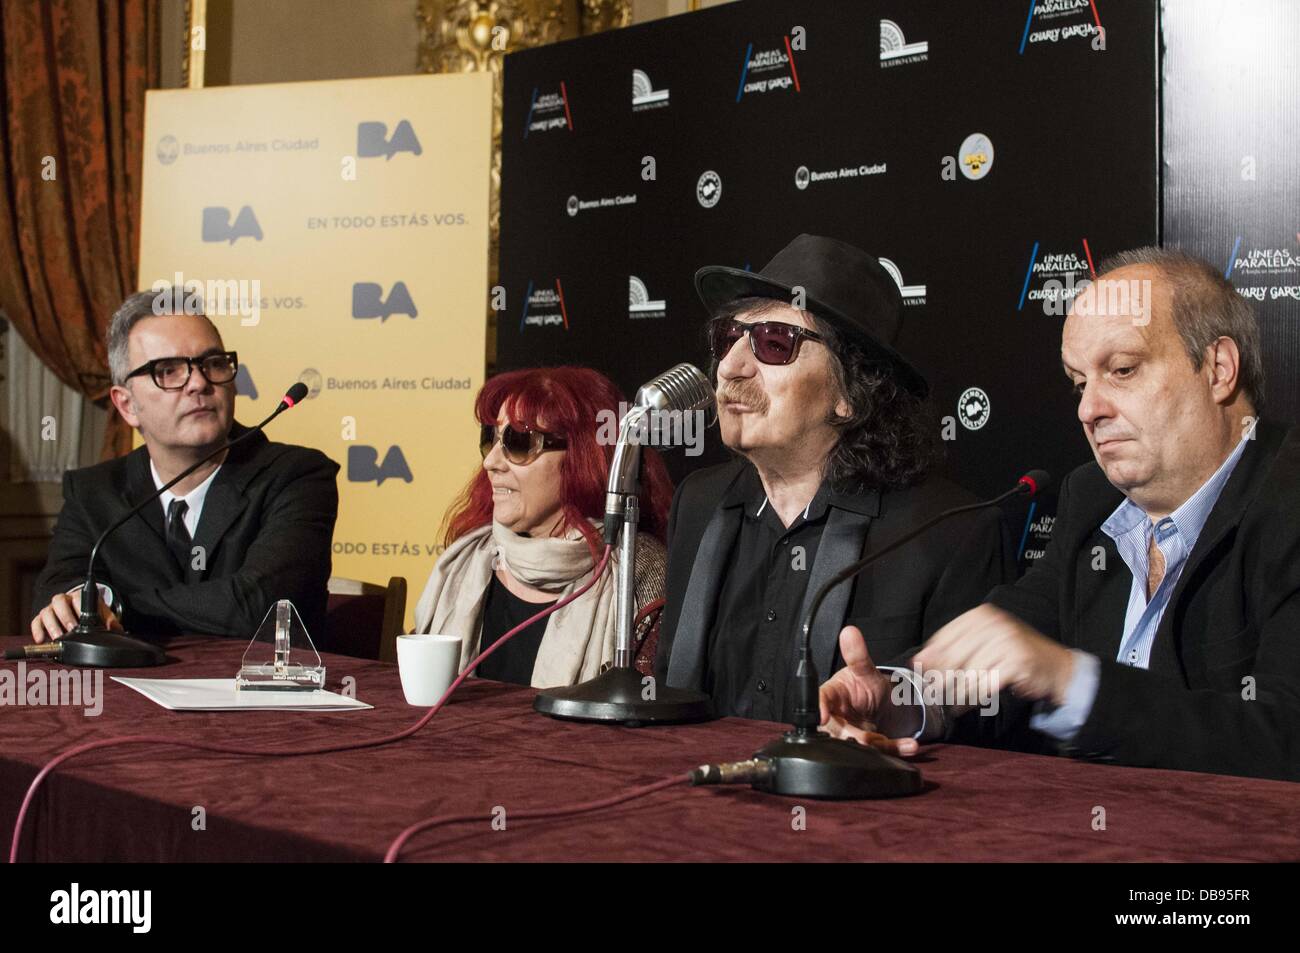 Buenos Aires, Buenos Aires, Argentina. 25th July, 2013. Introduced by Mayor Mayor Mauricio Macri, Argentinian rock star Charly Garcia announced two shows at the traditional Teatro Colon, the most important opera house in Argentina. In the event, he was named Cultural Ambassador of the city. He was surrounded by arranger Alejandro Teran (L), stage designer Renata Schussheim and Buenos Aires Ministry of Culture Hernan Lombardi Credit:  Patricio Murphy/ZUMAPRESS.com/Alamy Live News Stock Photo